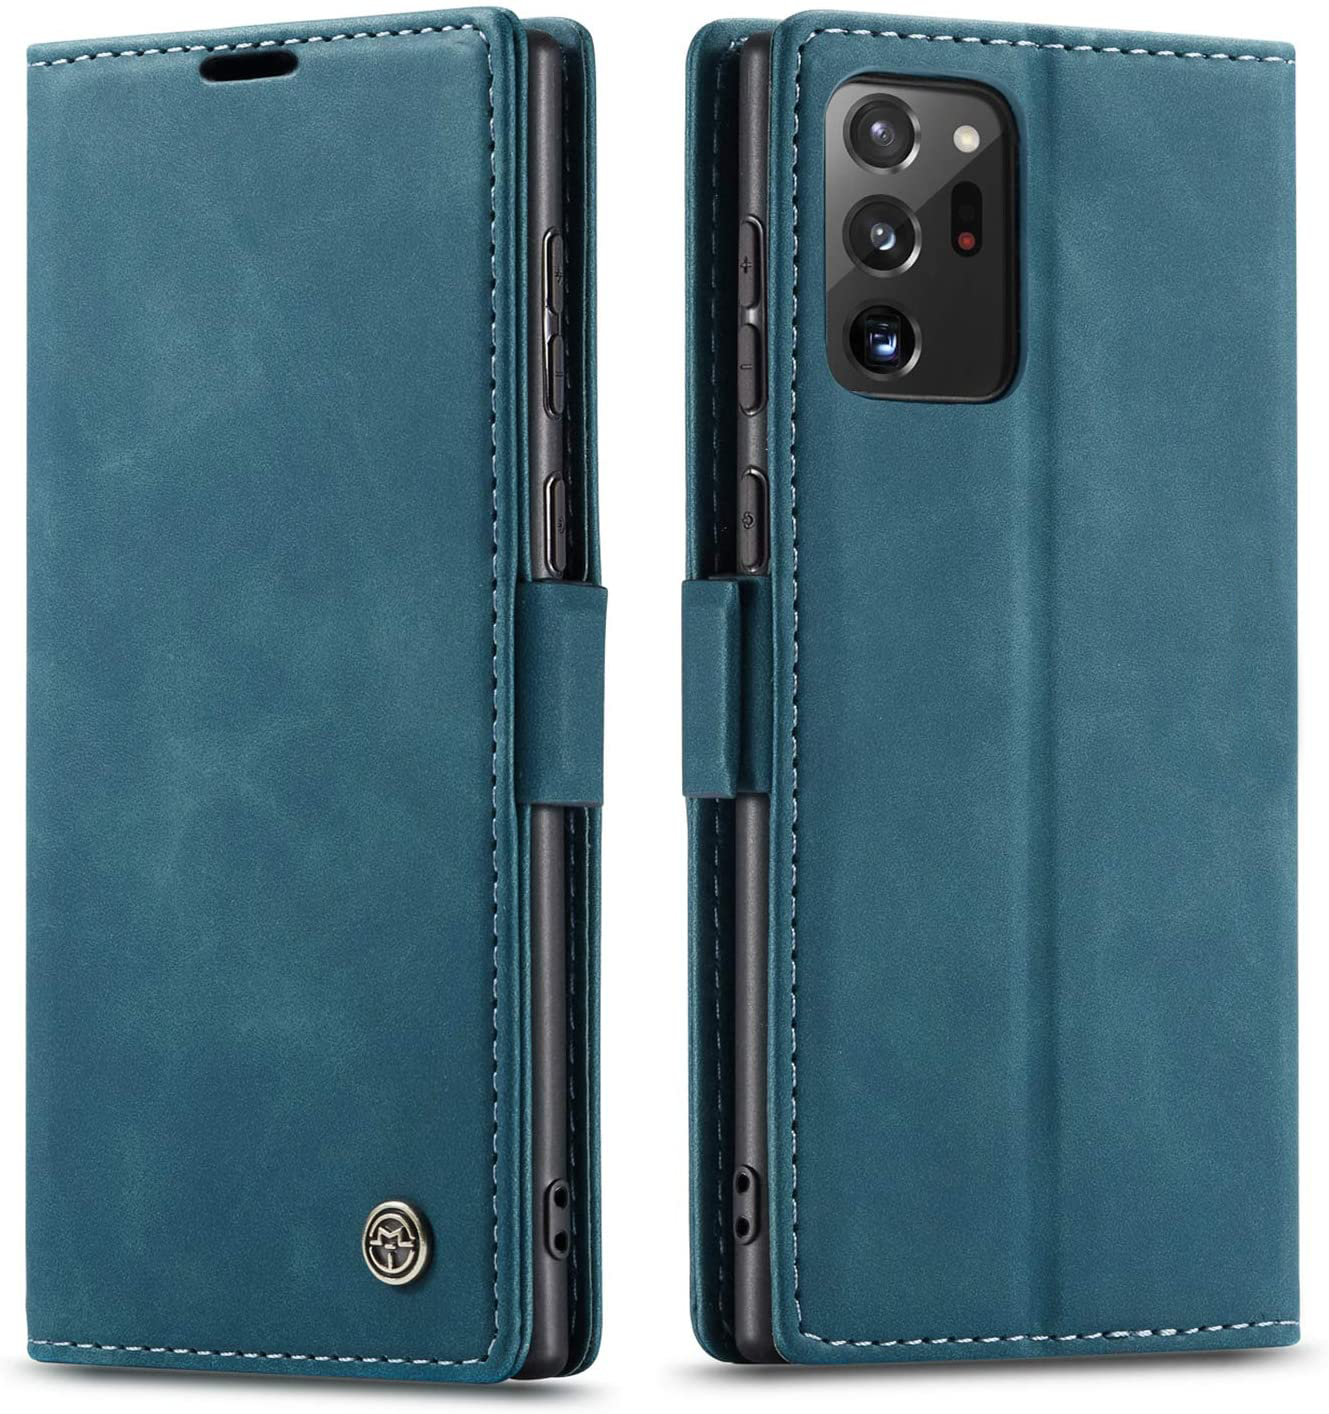 Samsung Galaxy Note 20 Ultra blue color leather wallet flip cover case By excelsior